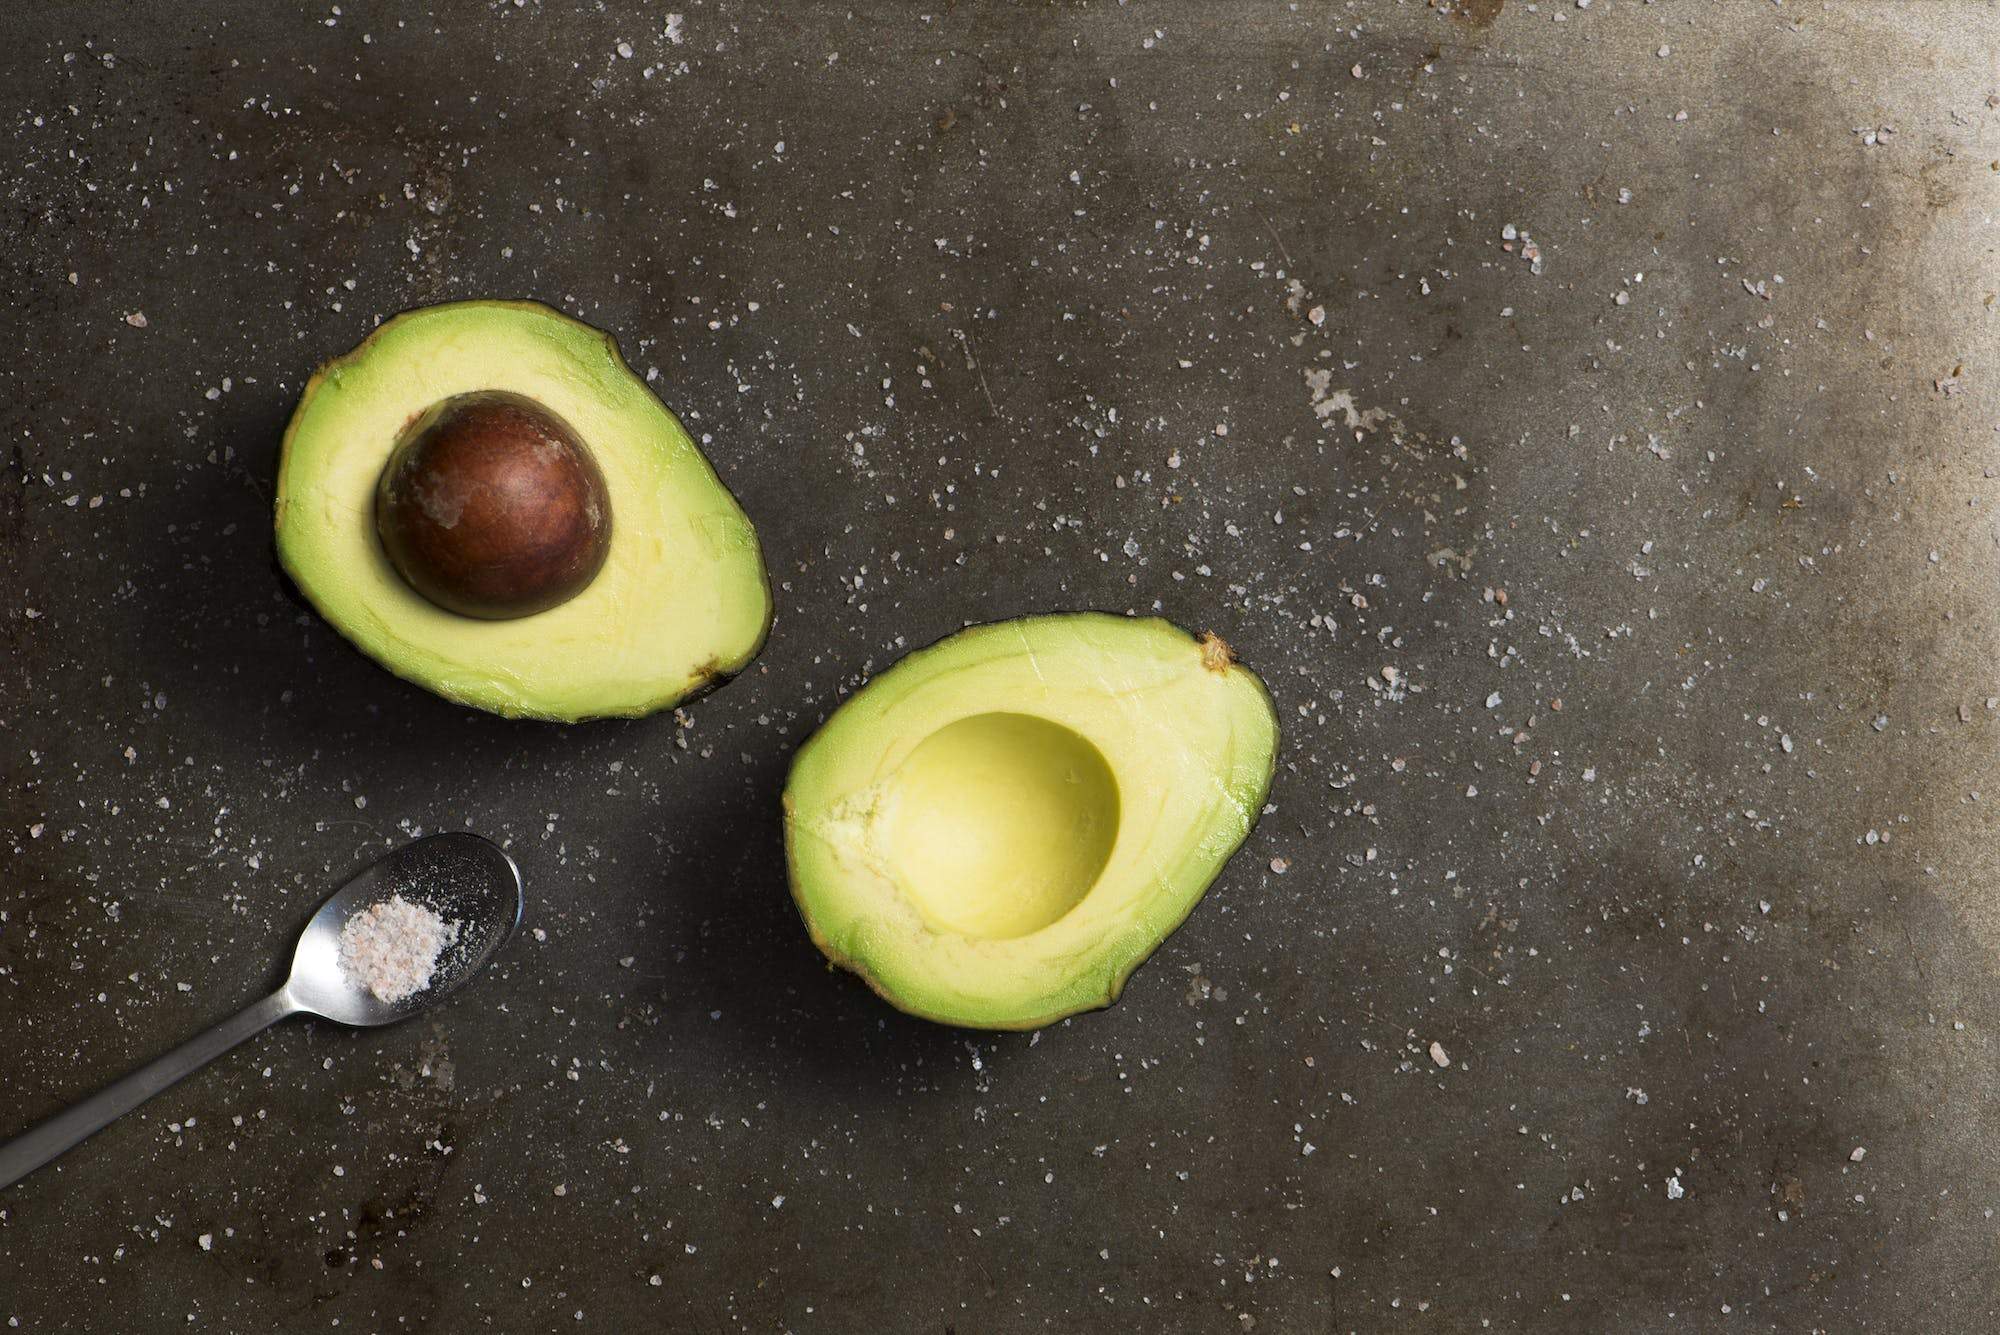 Healthy Fats vs. Harmful Fats: What You Need to Know